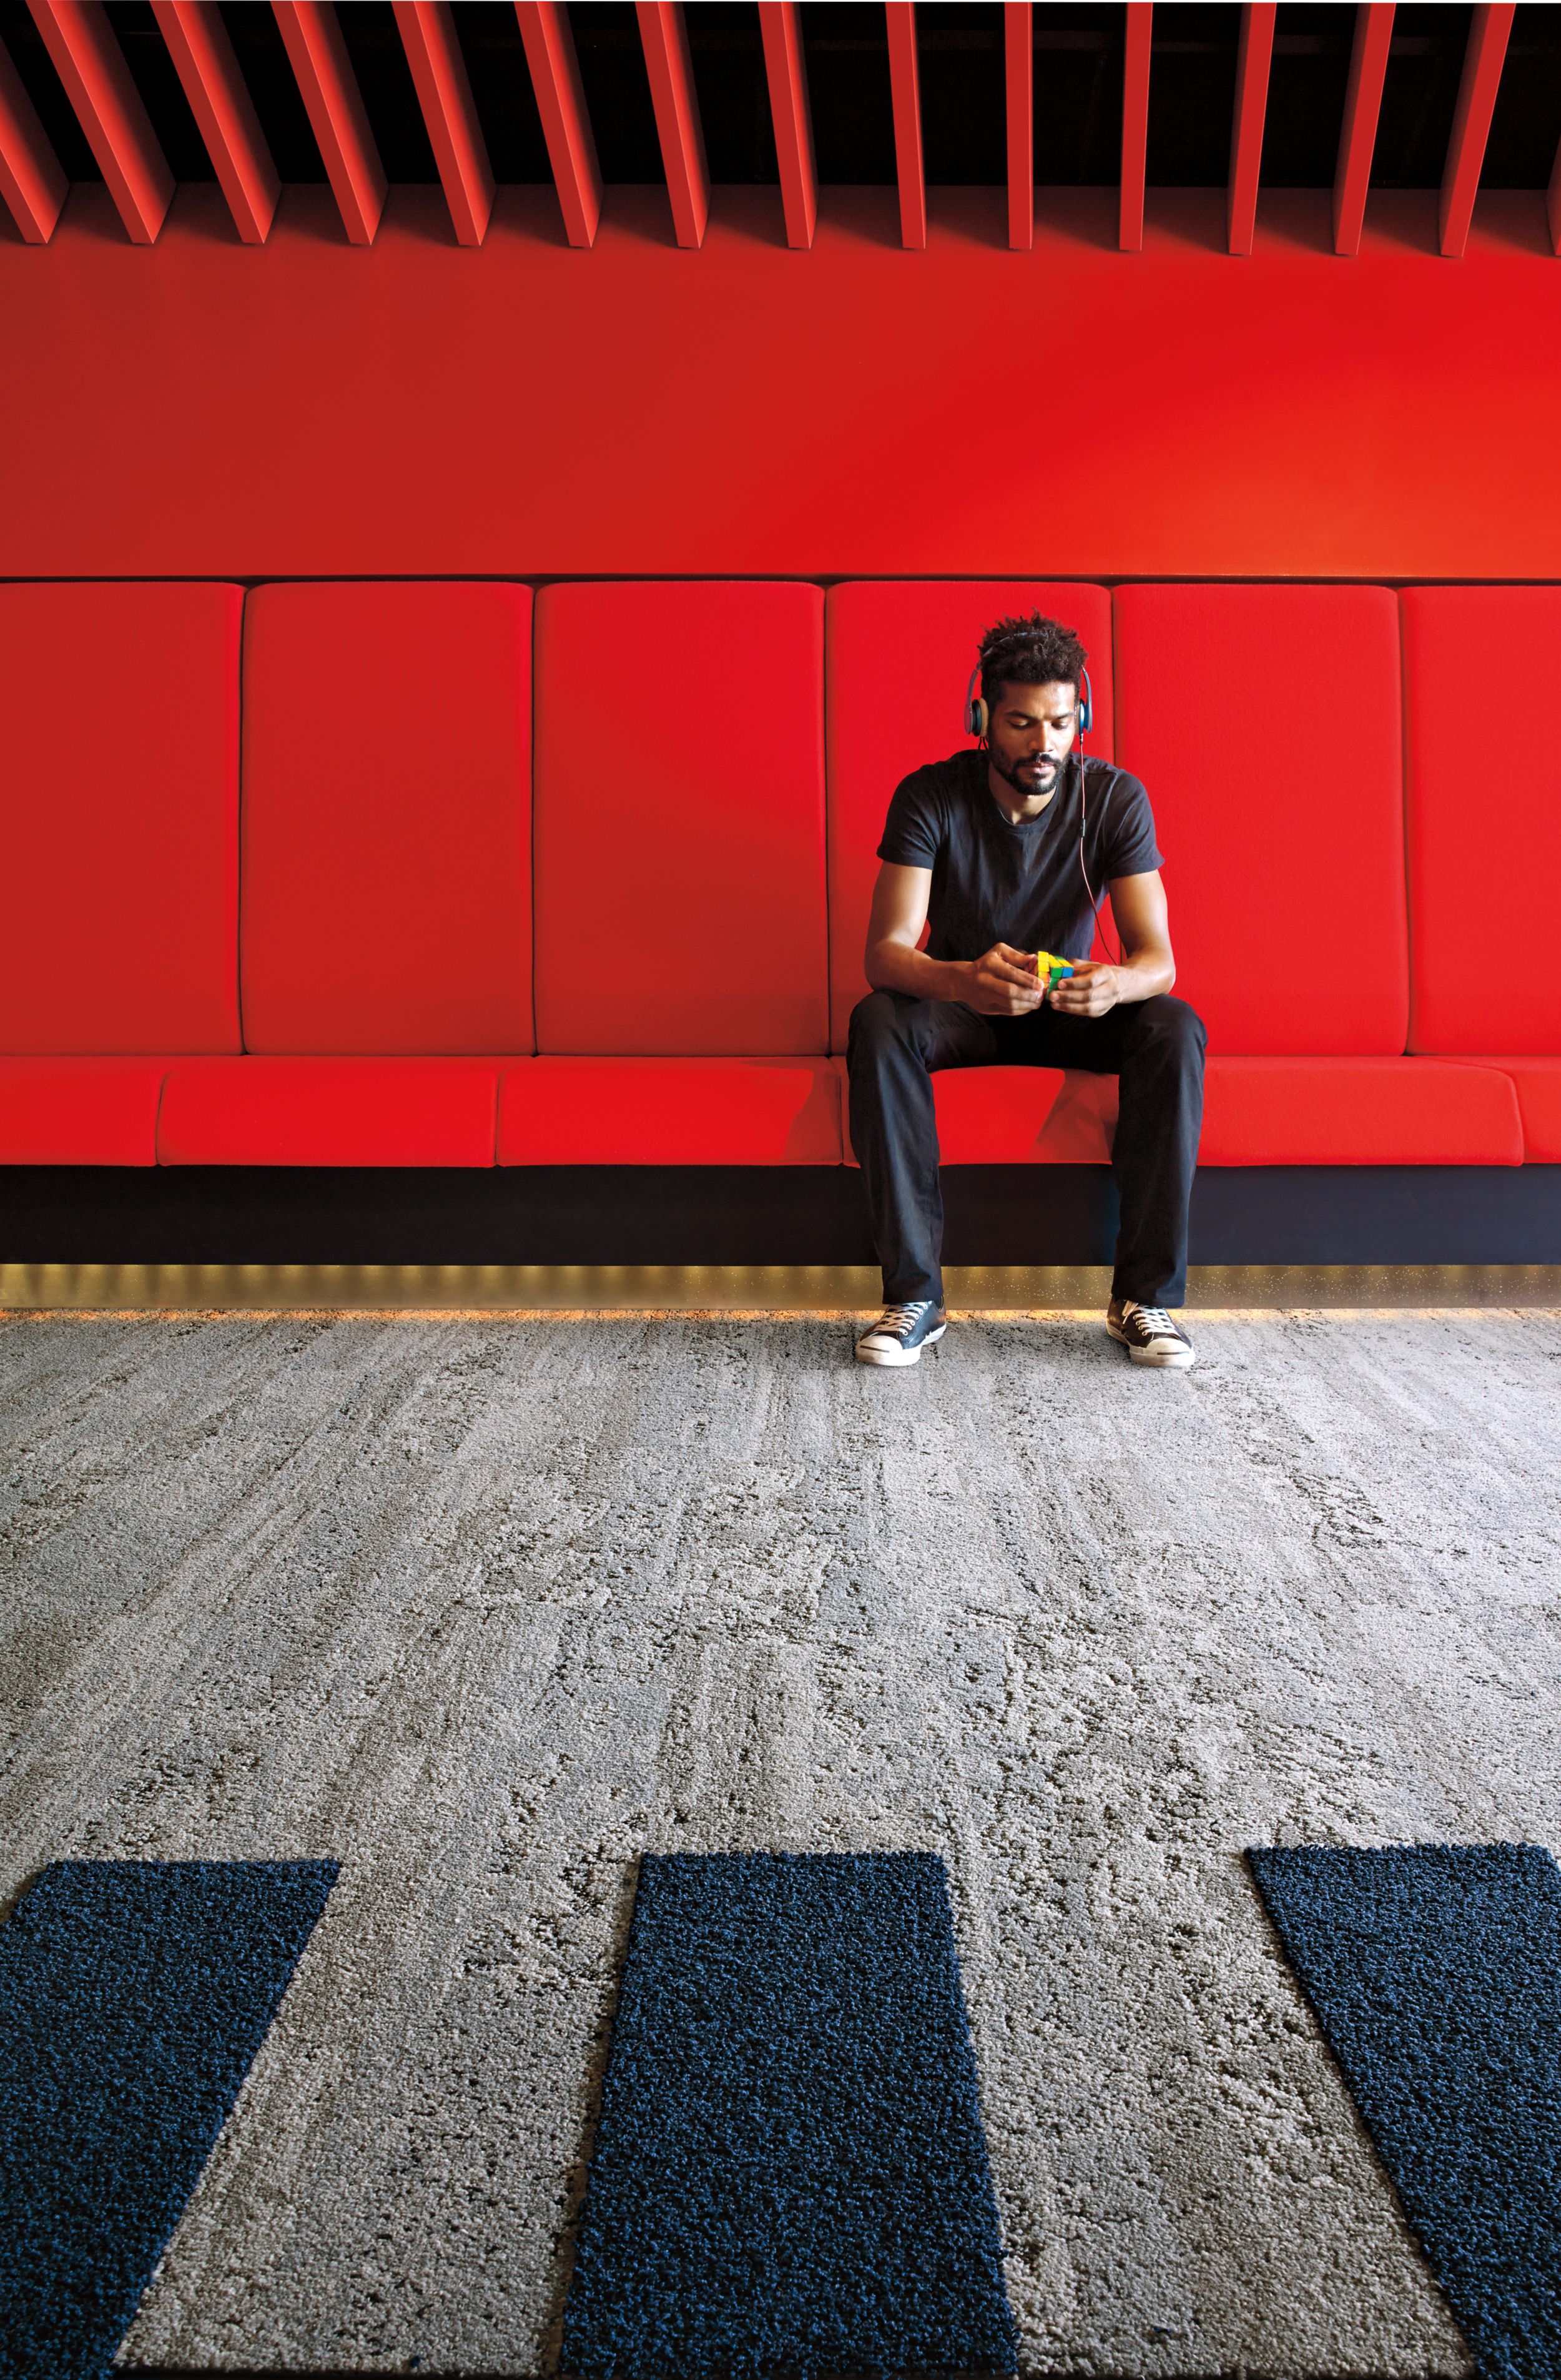 Interface HN810 plank carpet tile in waiting area with red bench and wall and man listening to music imagen número 3